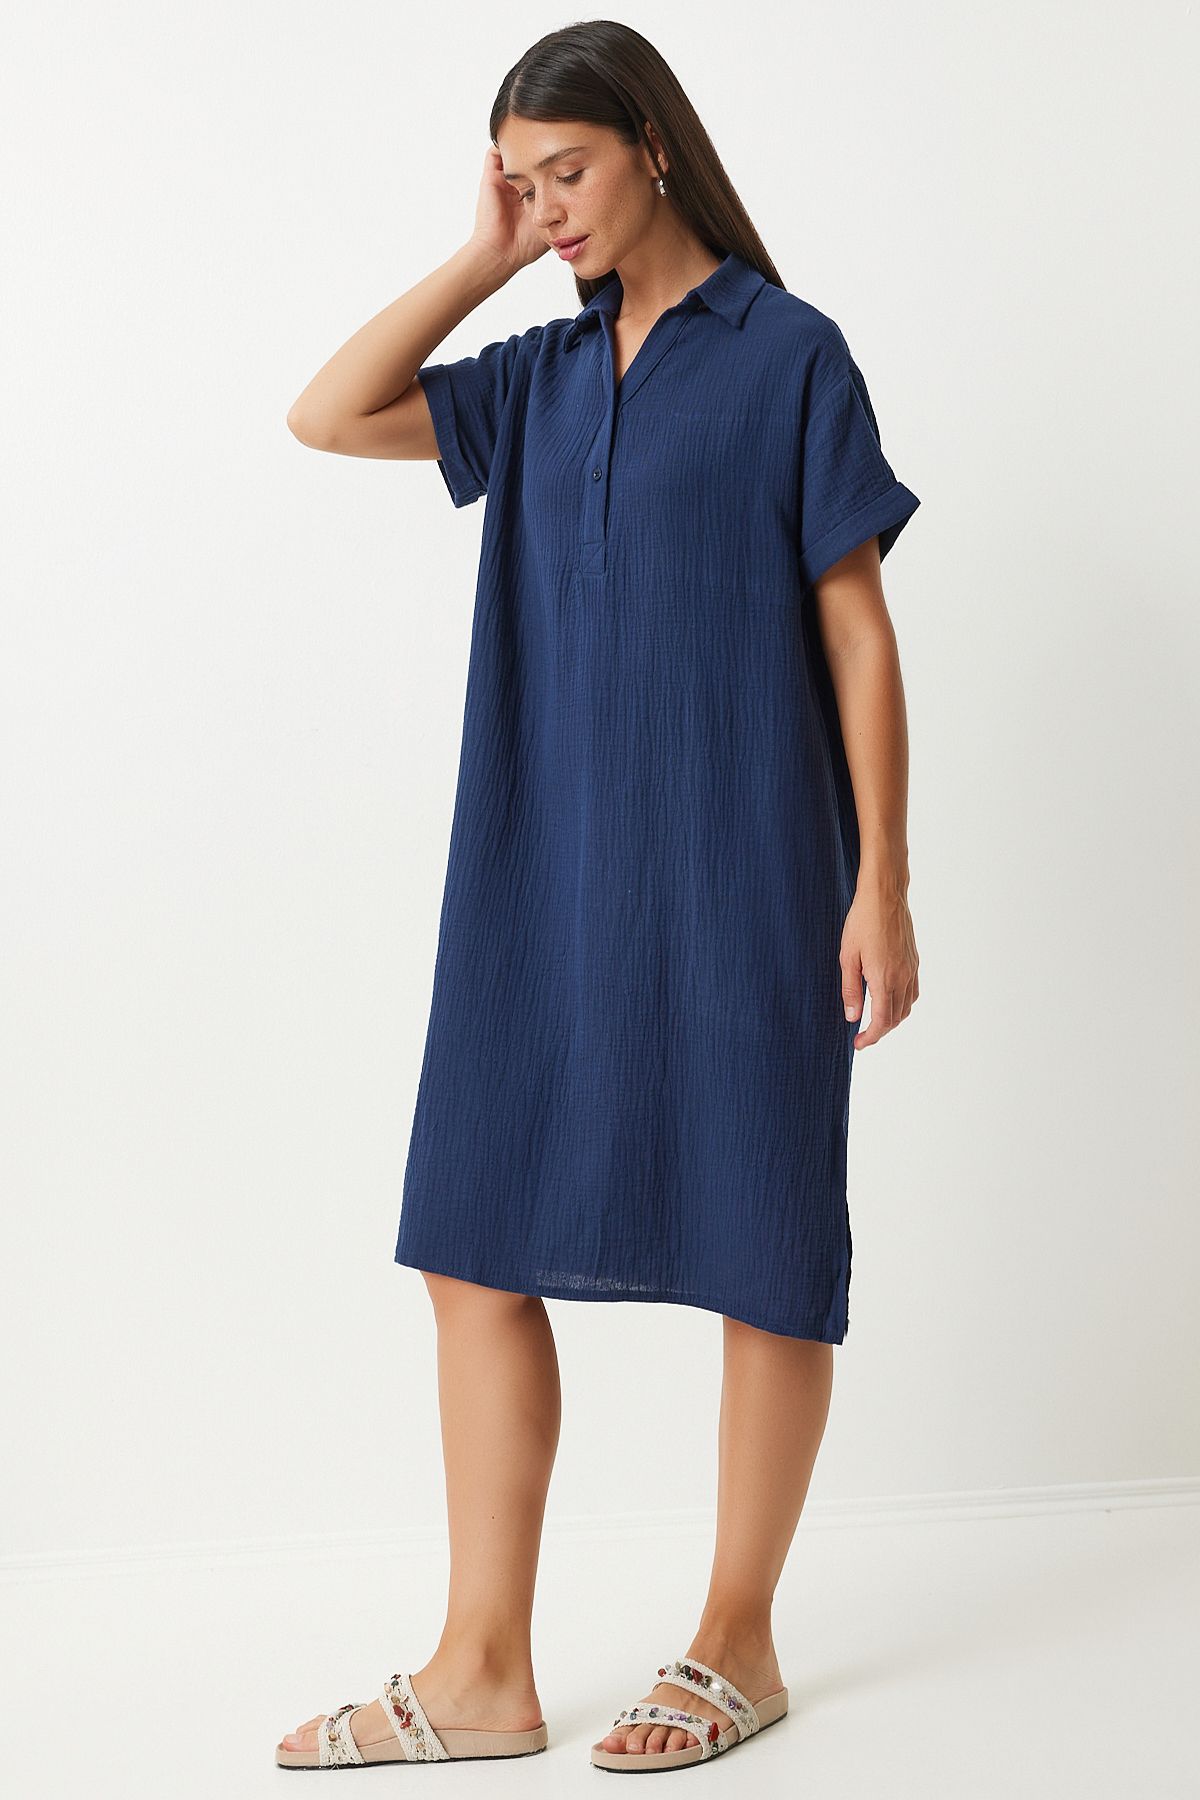 Happiness İstanbul Women's Navy Blue Polo Neck Summer Loose Muslin Dress